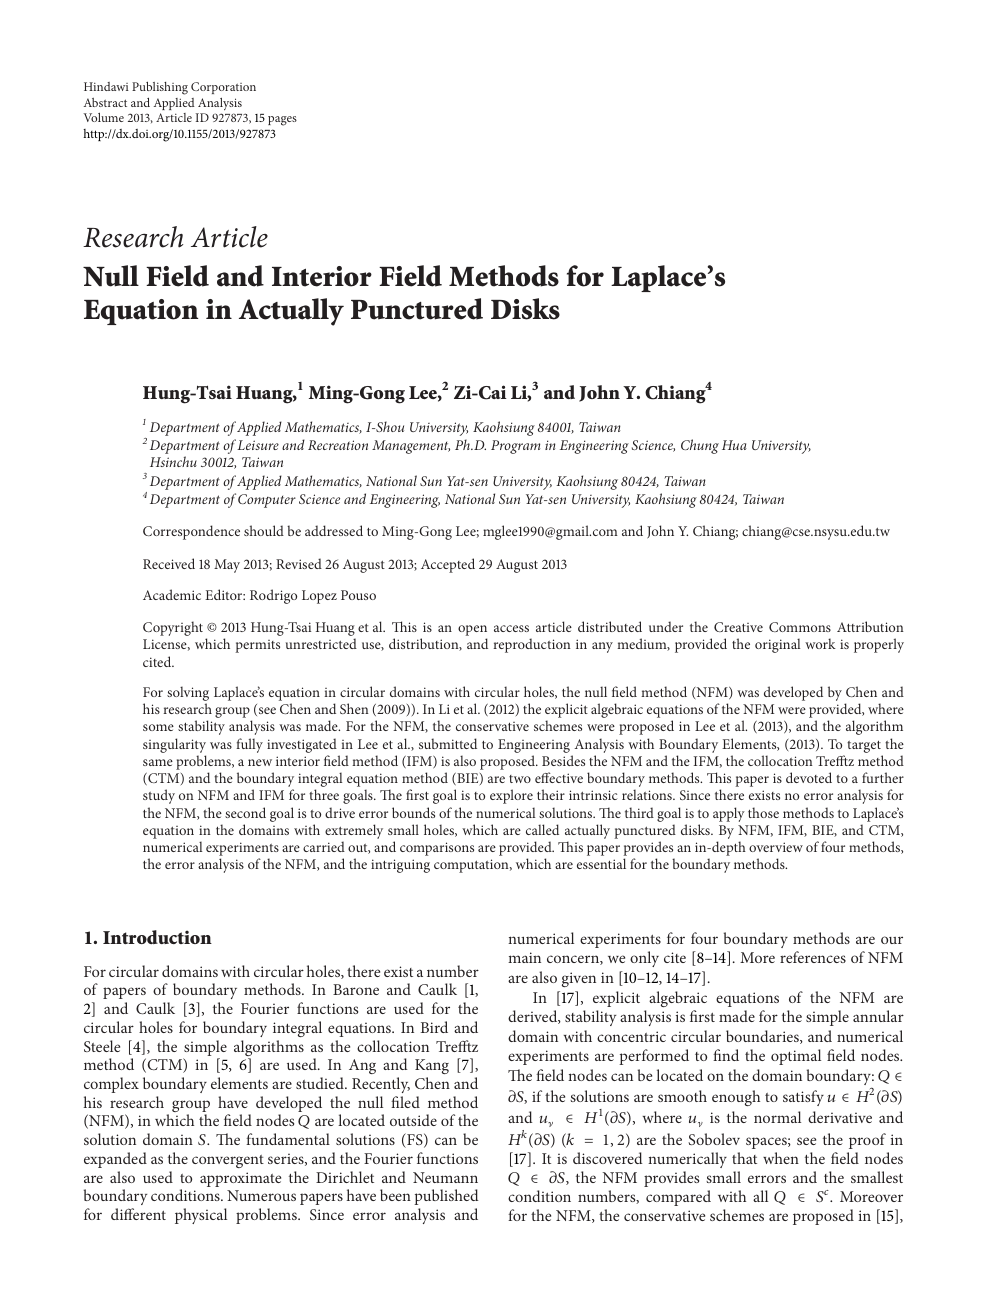 Null Field And Interior Field Methods For Laplace S Equation In Actually Punctured Disks Topic Of Research Paper In Mathematics Download Scholarly Article Pdf And Read For Free On Cyberleninka Open Science